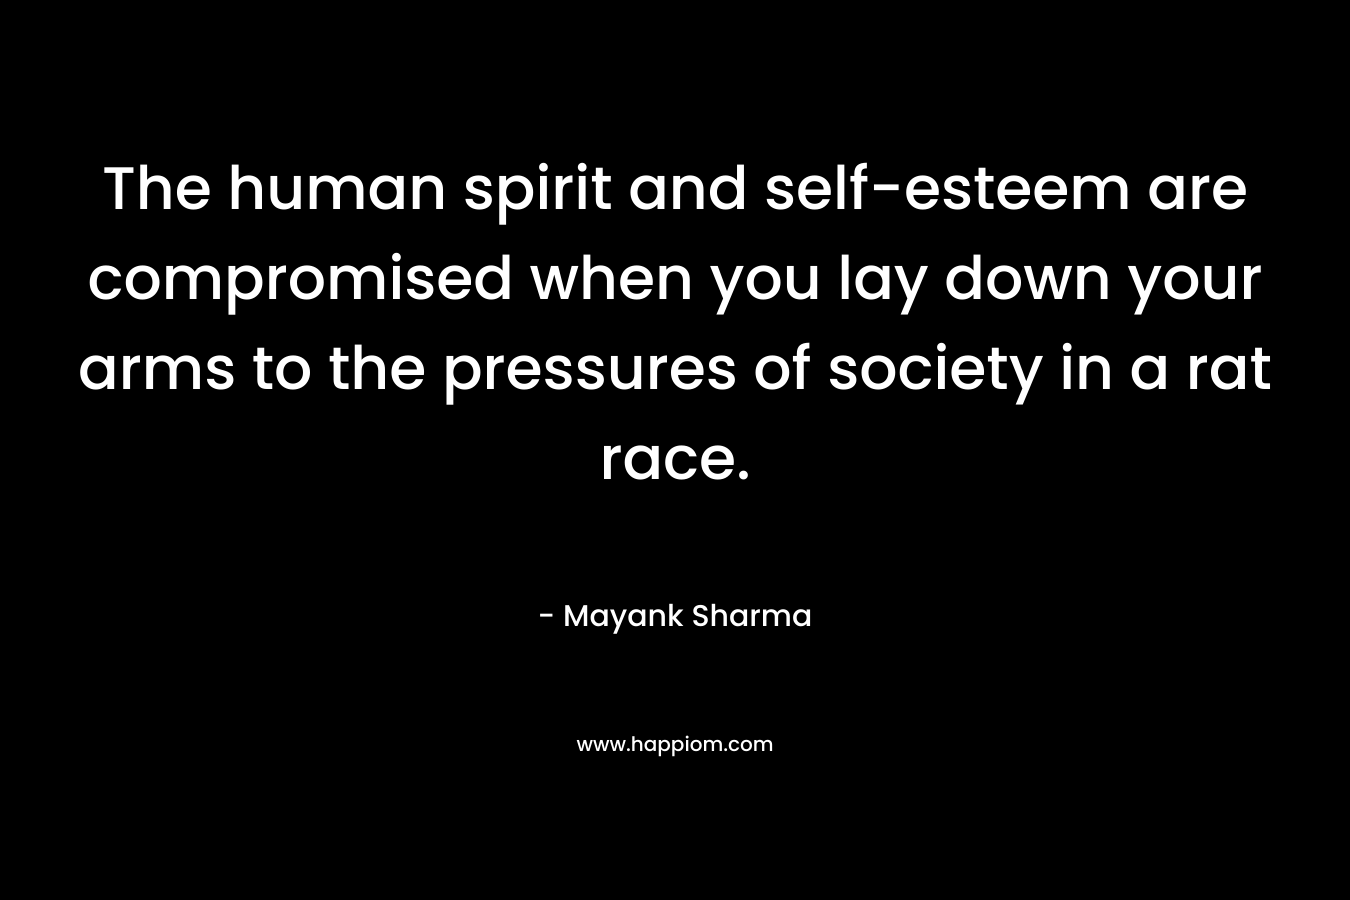 The human spirit and self-esteem are compromised when you lay down your arms to the pressures of society in a rat race. – Mayank Sharma